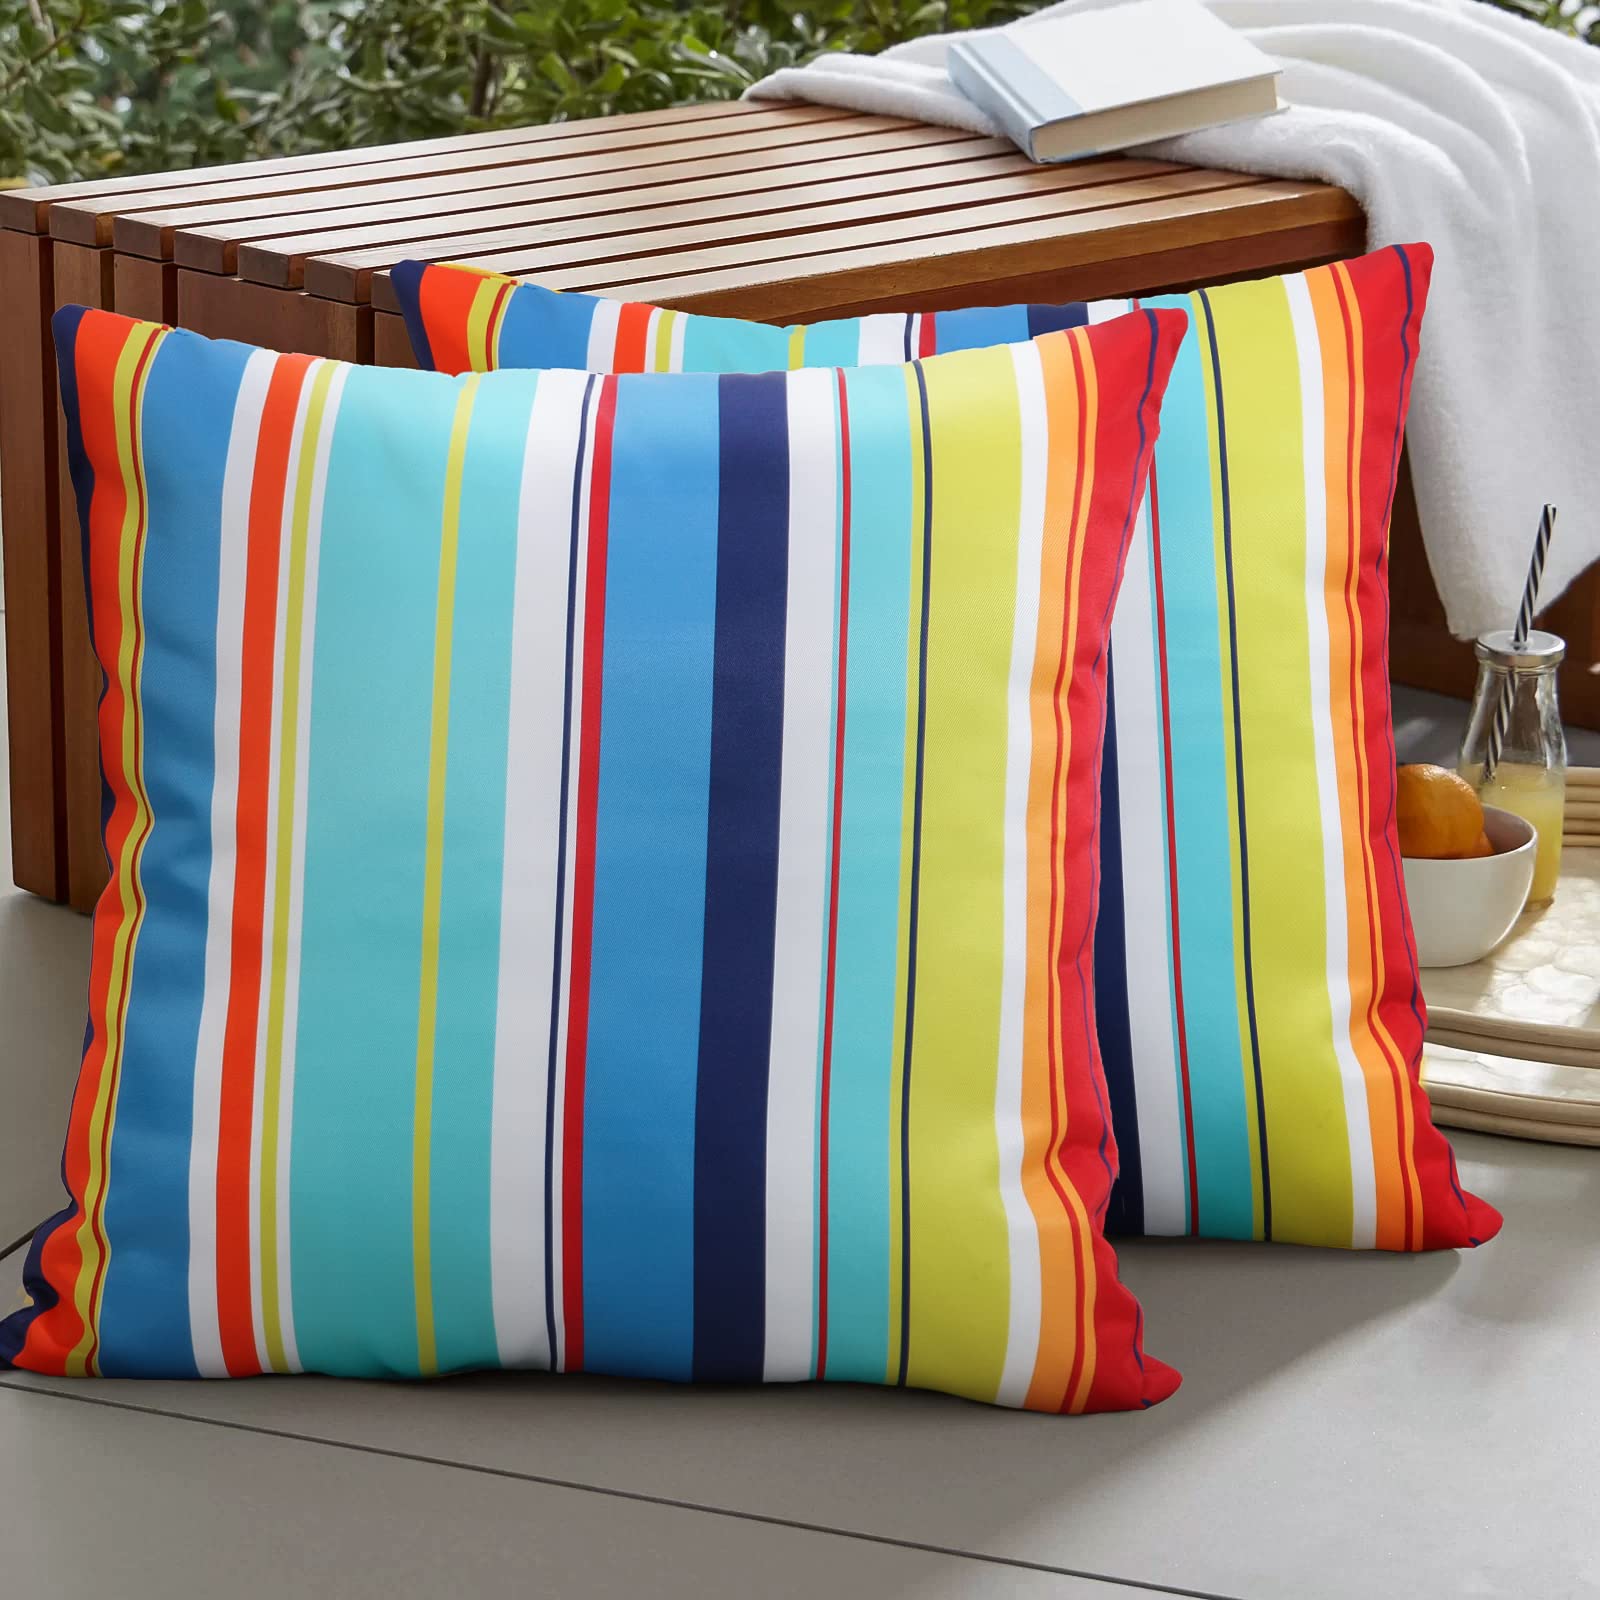 cygnus 18x18 Inch Colorful Stripe Throw Pillow Covers with Zipper Outdoor Waterproof for Patio Furniture Outside Decor Set of 2